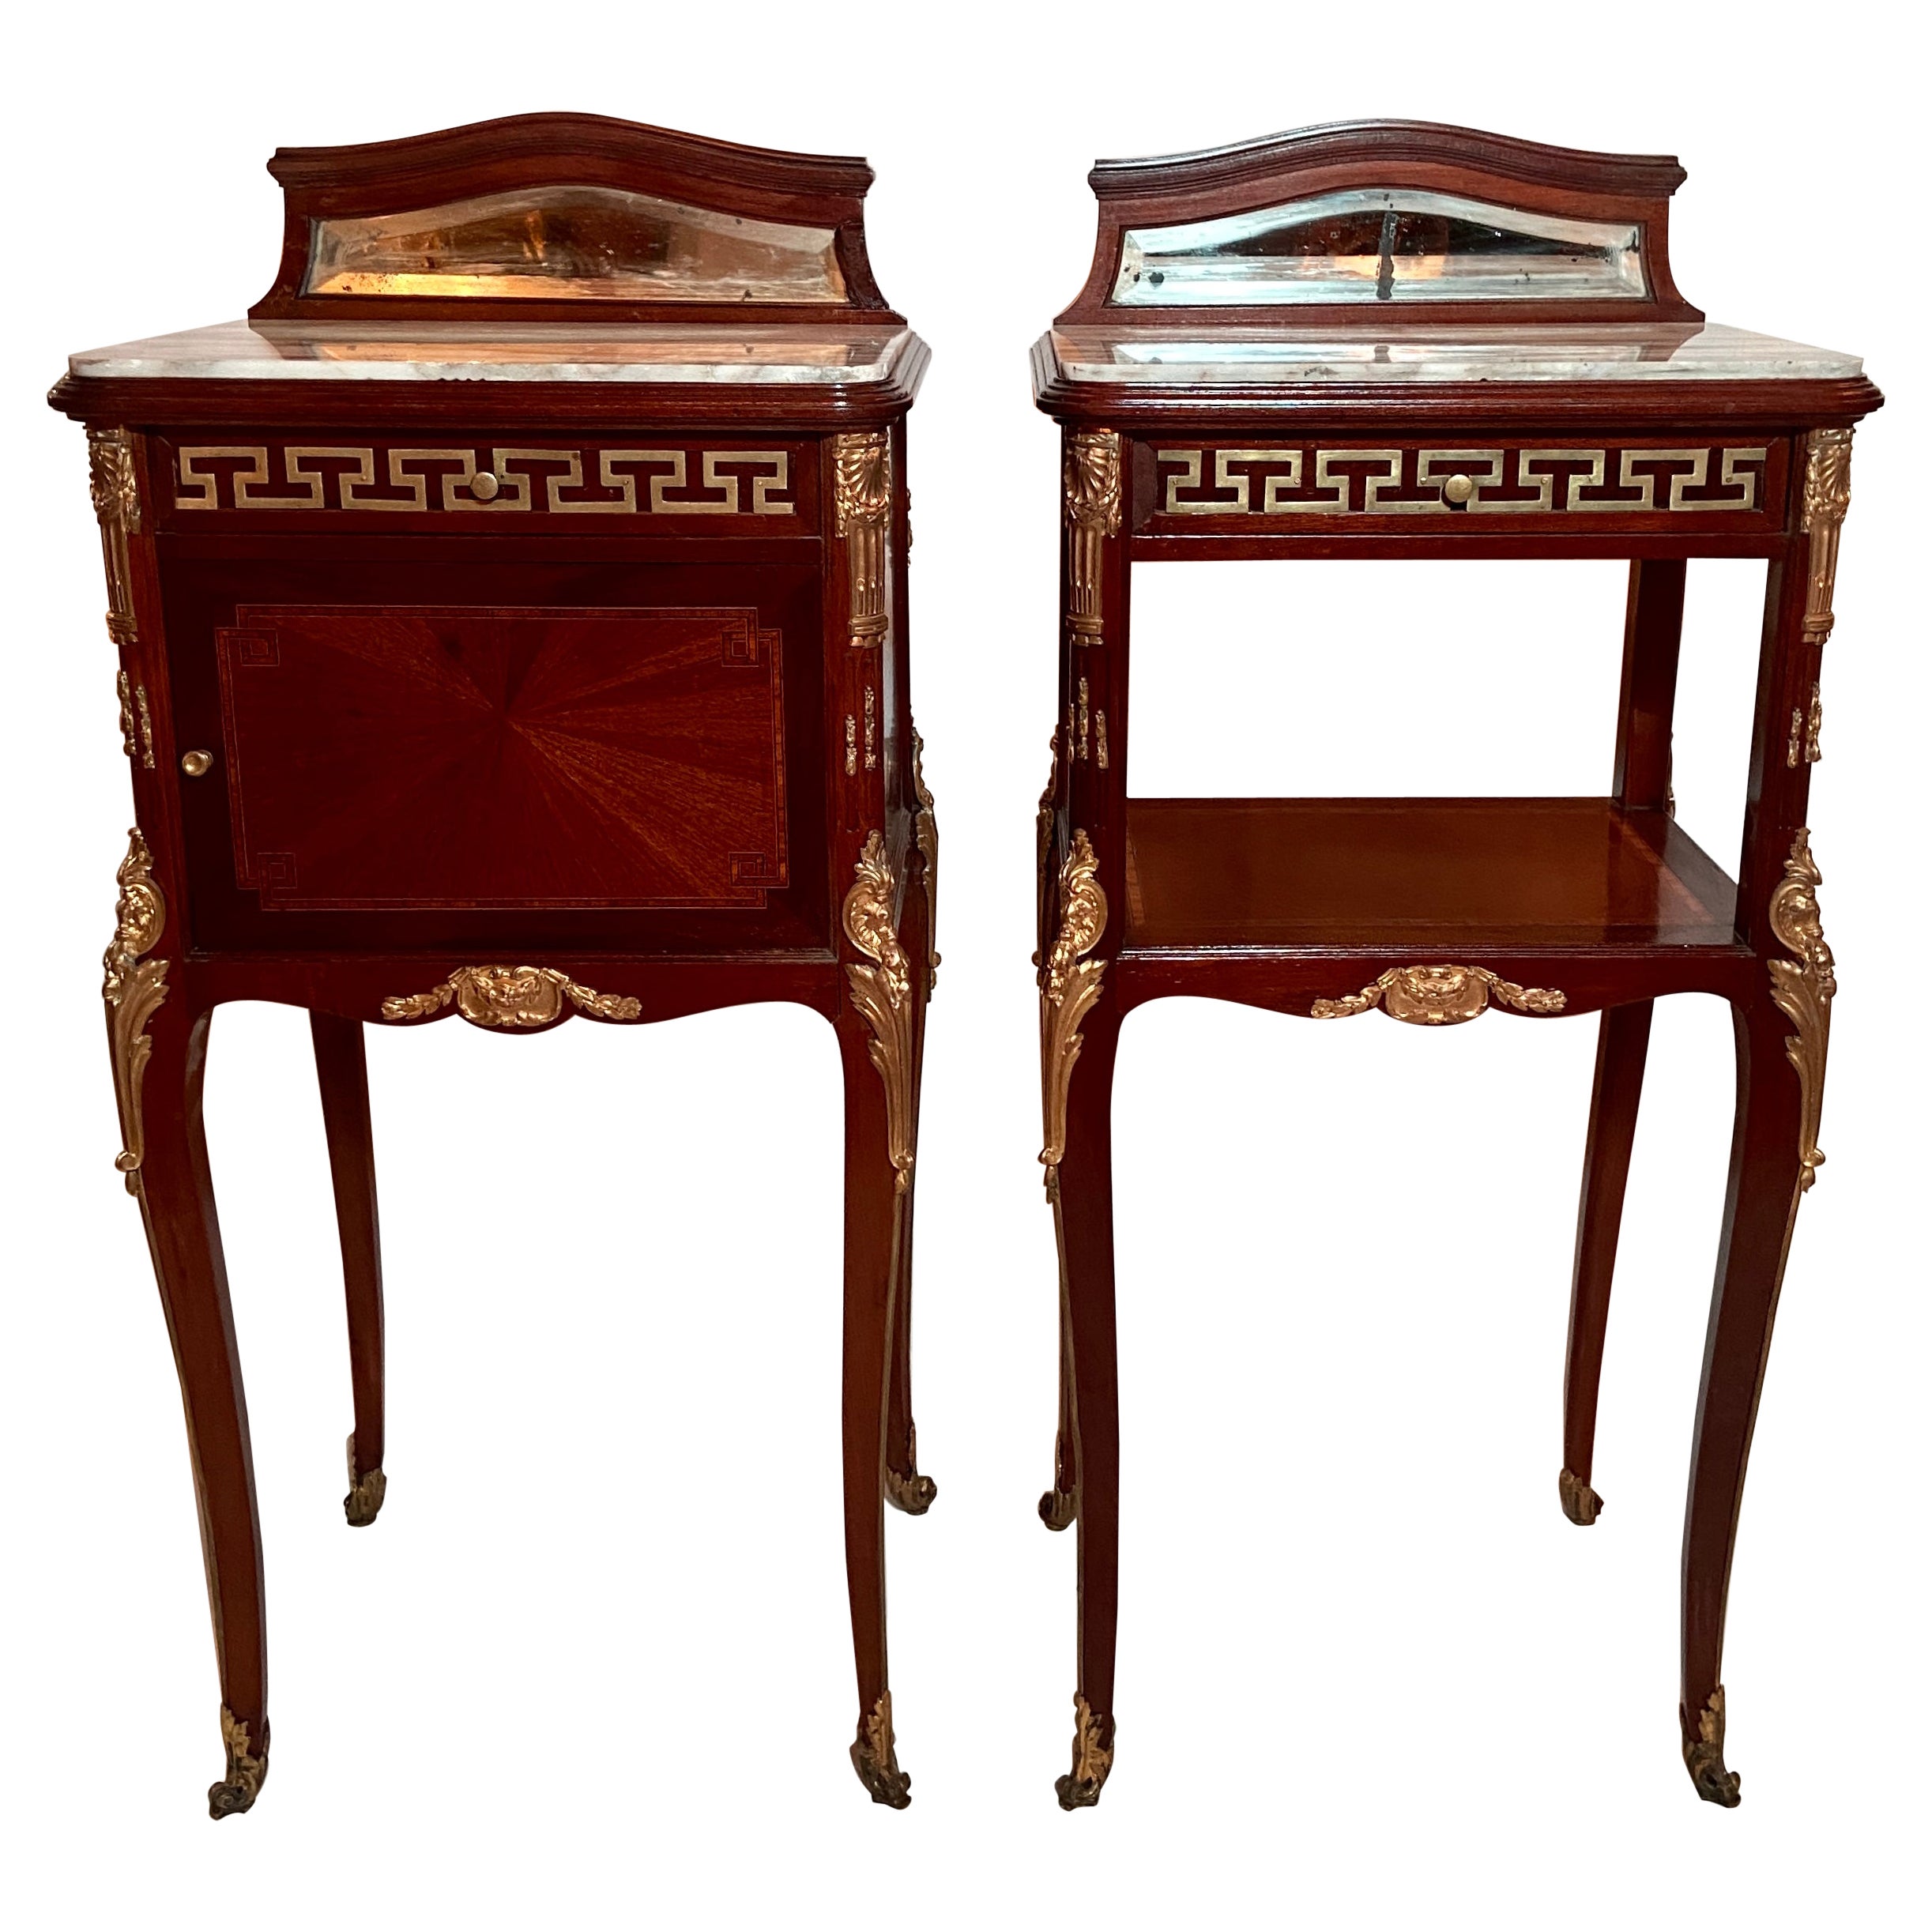 Pair Antique French Bronze D' Ore & Marble Top Mahogany Nightstand Tables C 1890 For Sale